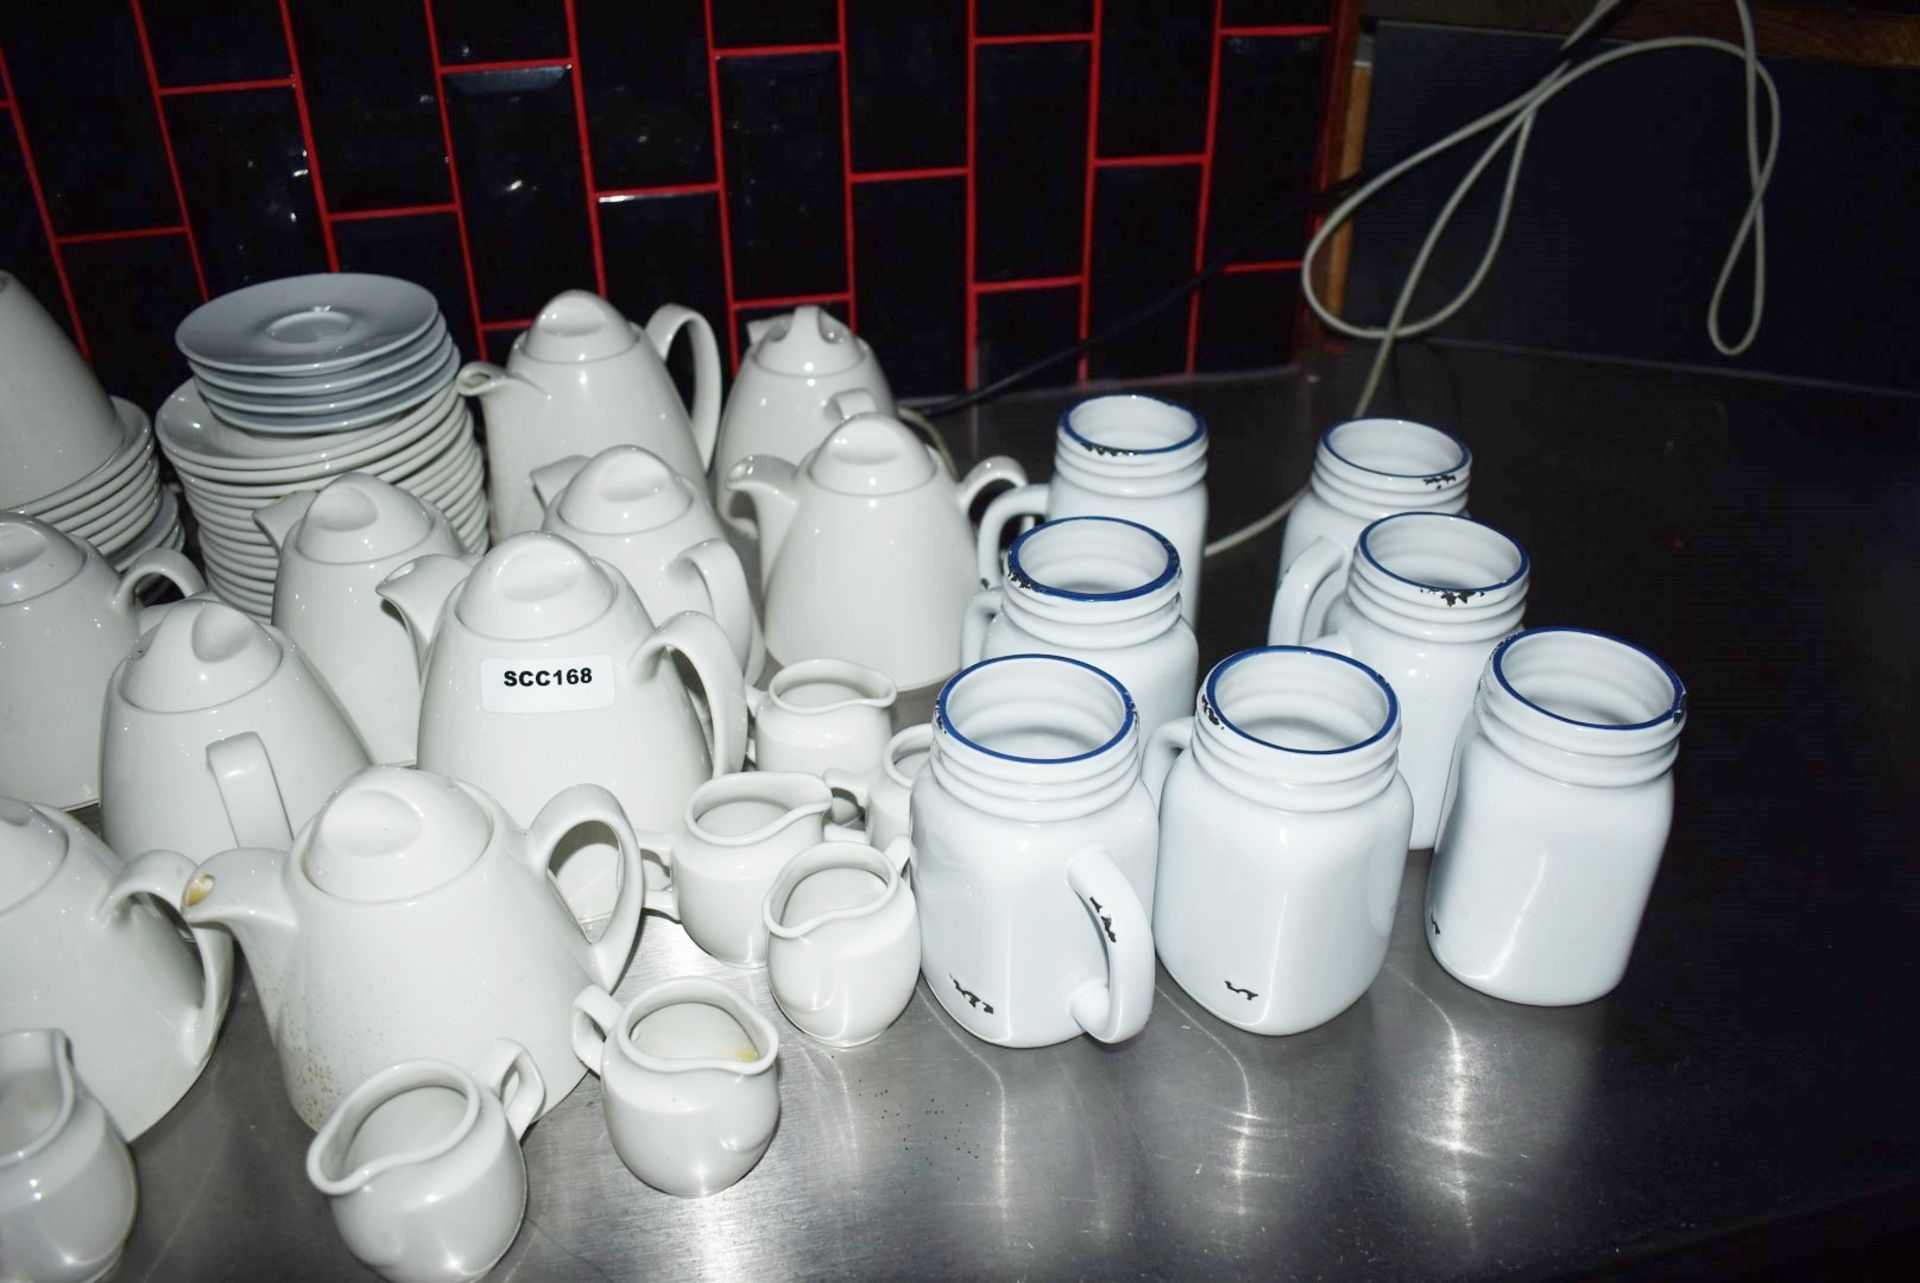 Assorted Collection Ceramic Coffee/Teaware to Include 80 Items - Teapots, Milk Jugs, Saucers & More - Image 5 of 10